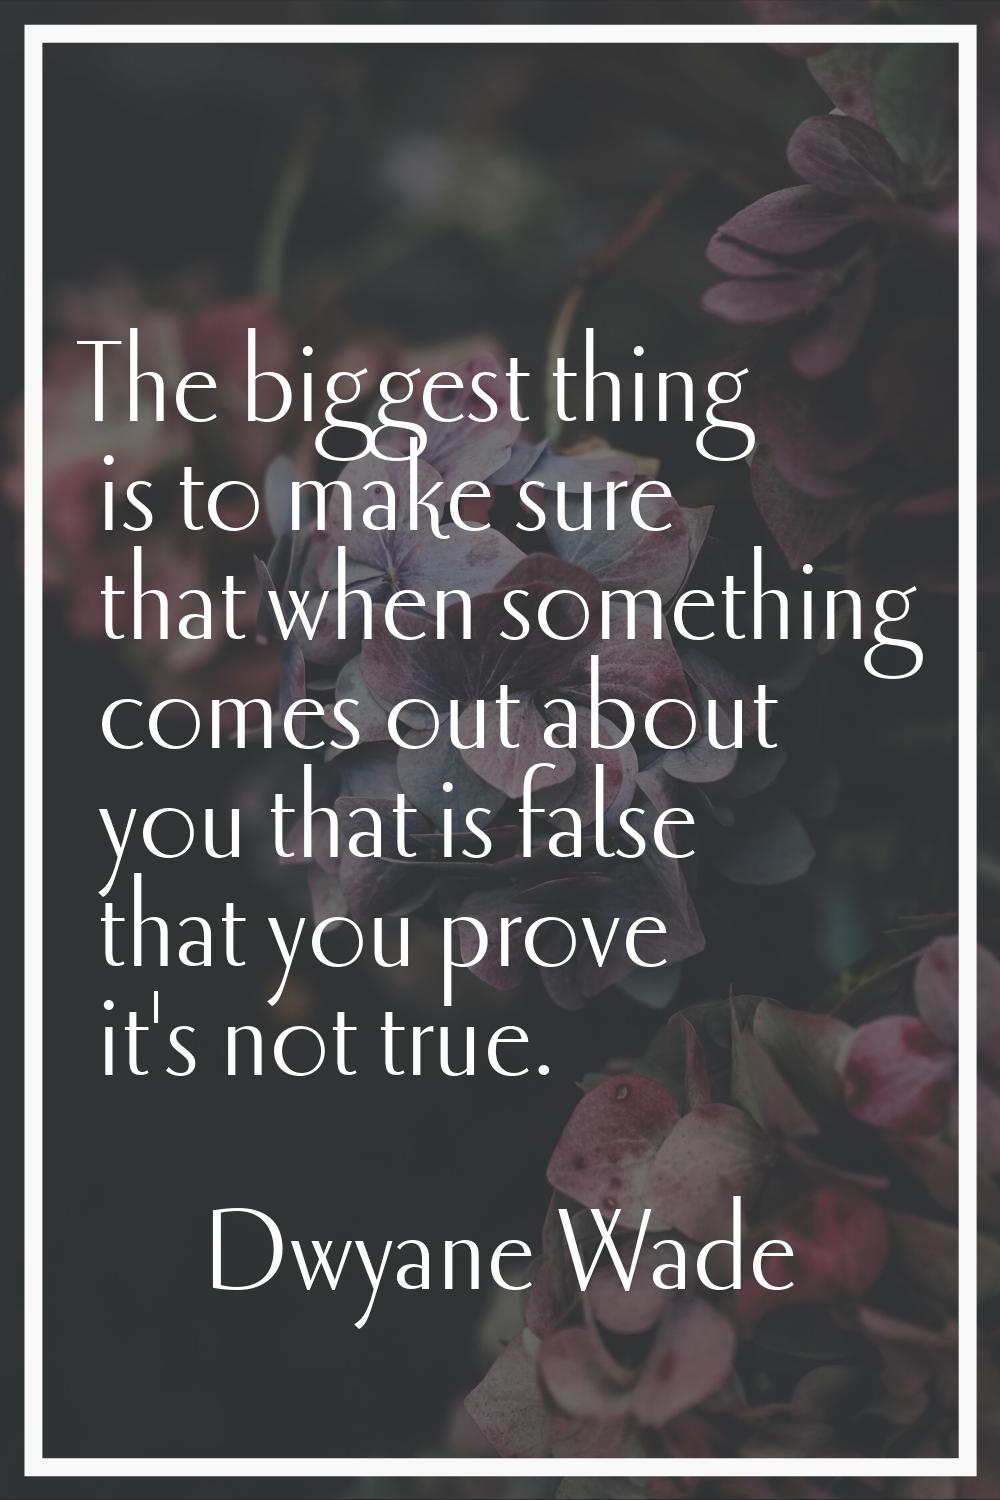 The biggest thing is to make sure that when something comes out about you that is false that you pr